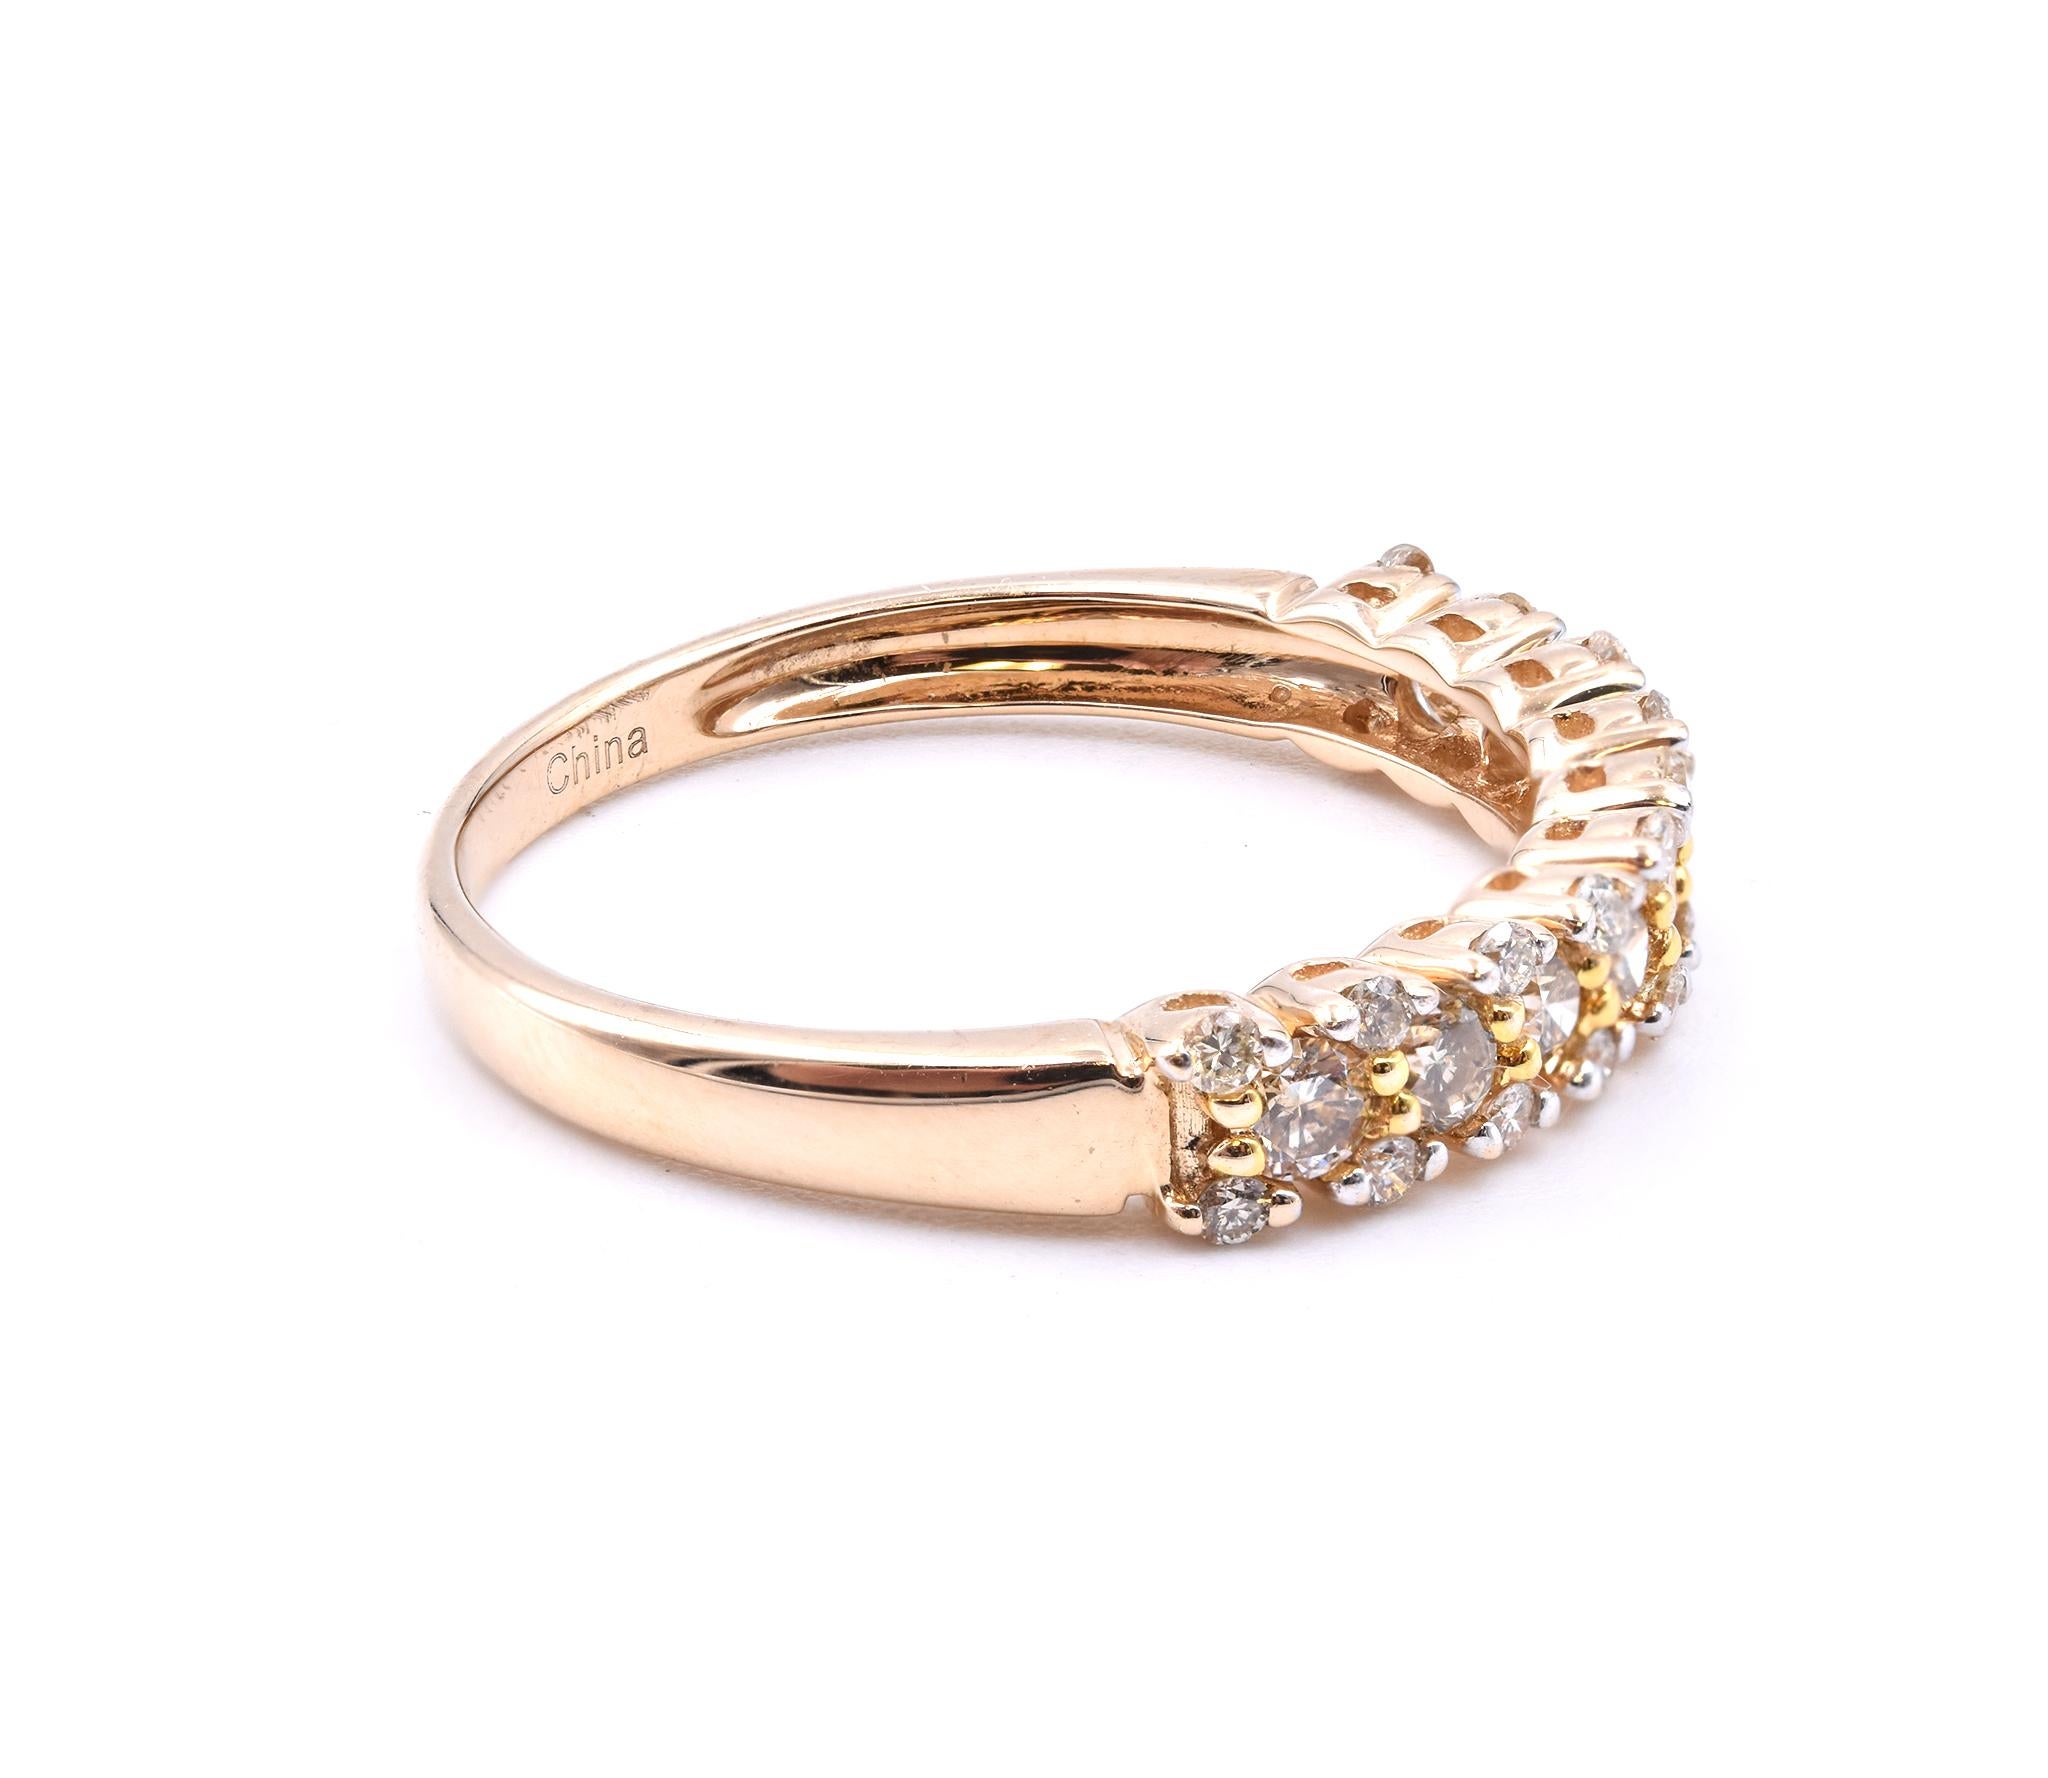 Designer: custom
Material: 14k yellow gold
Diamonds: 9 round cut = .27cttw
Color: Champagne
Diamonds: 20 round cut = .20cttw
Color: H
Clarity: SI1
Size: 7.25 (please allow two additional shipping days for sizing requests)  
Dimensions: ring measures